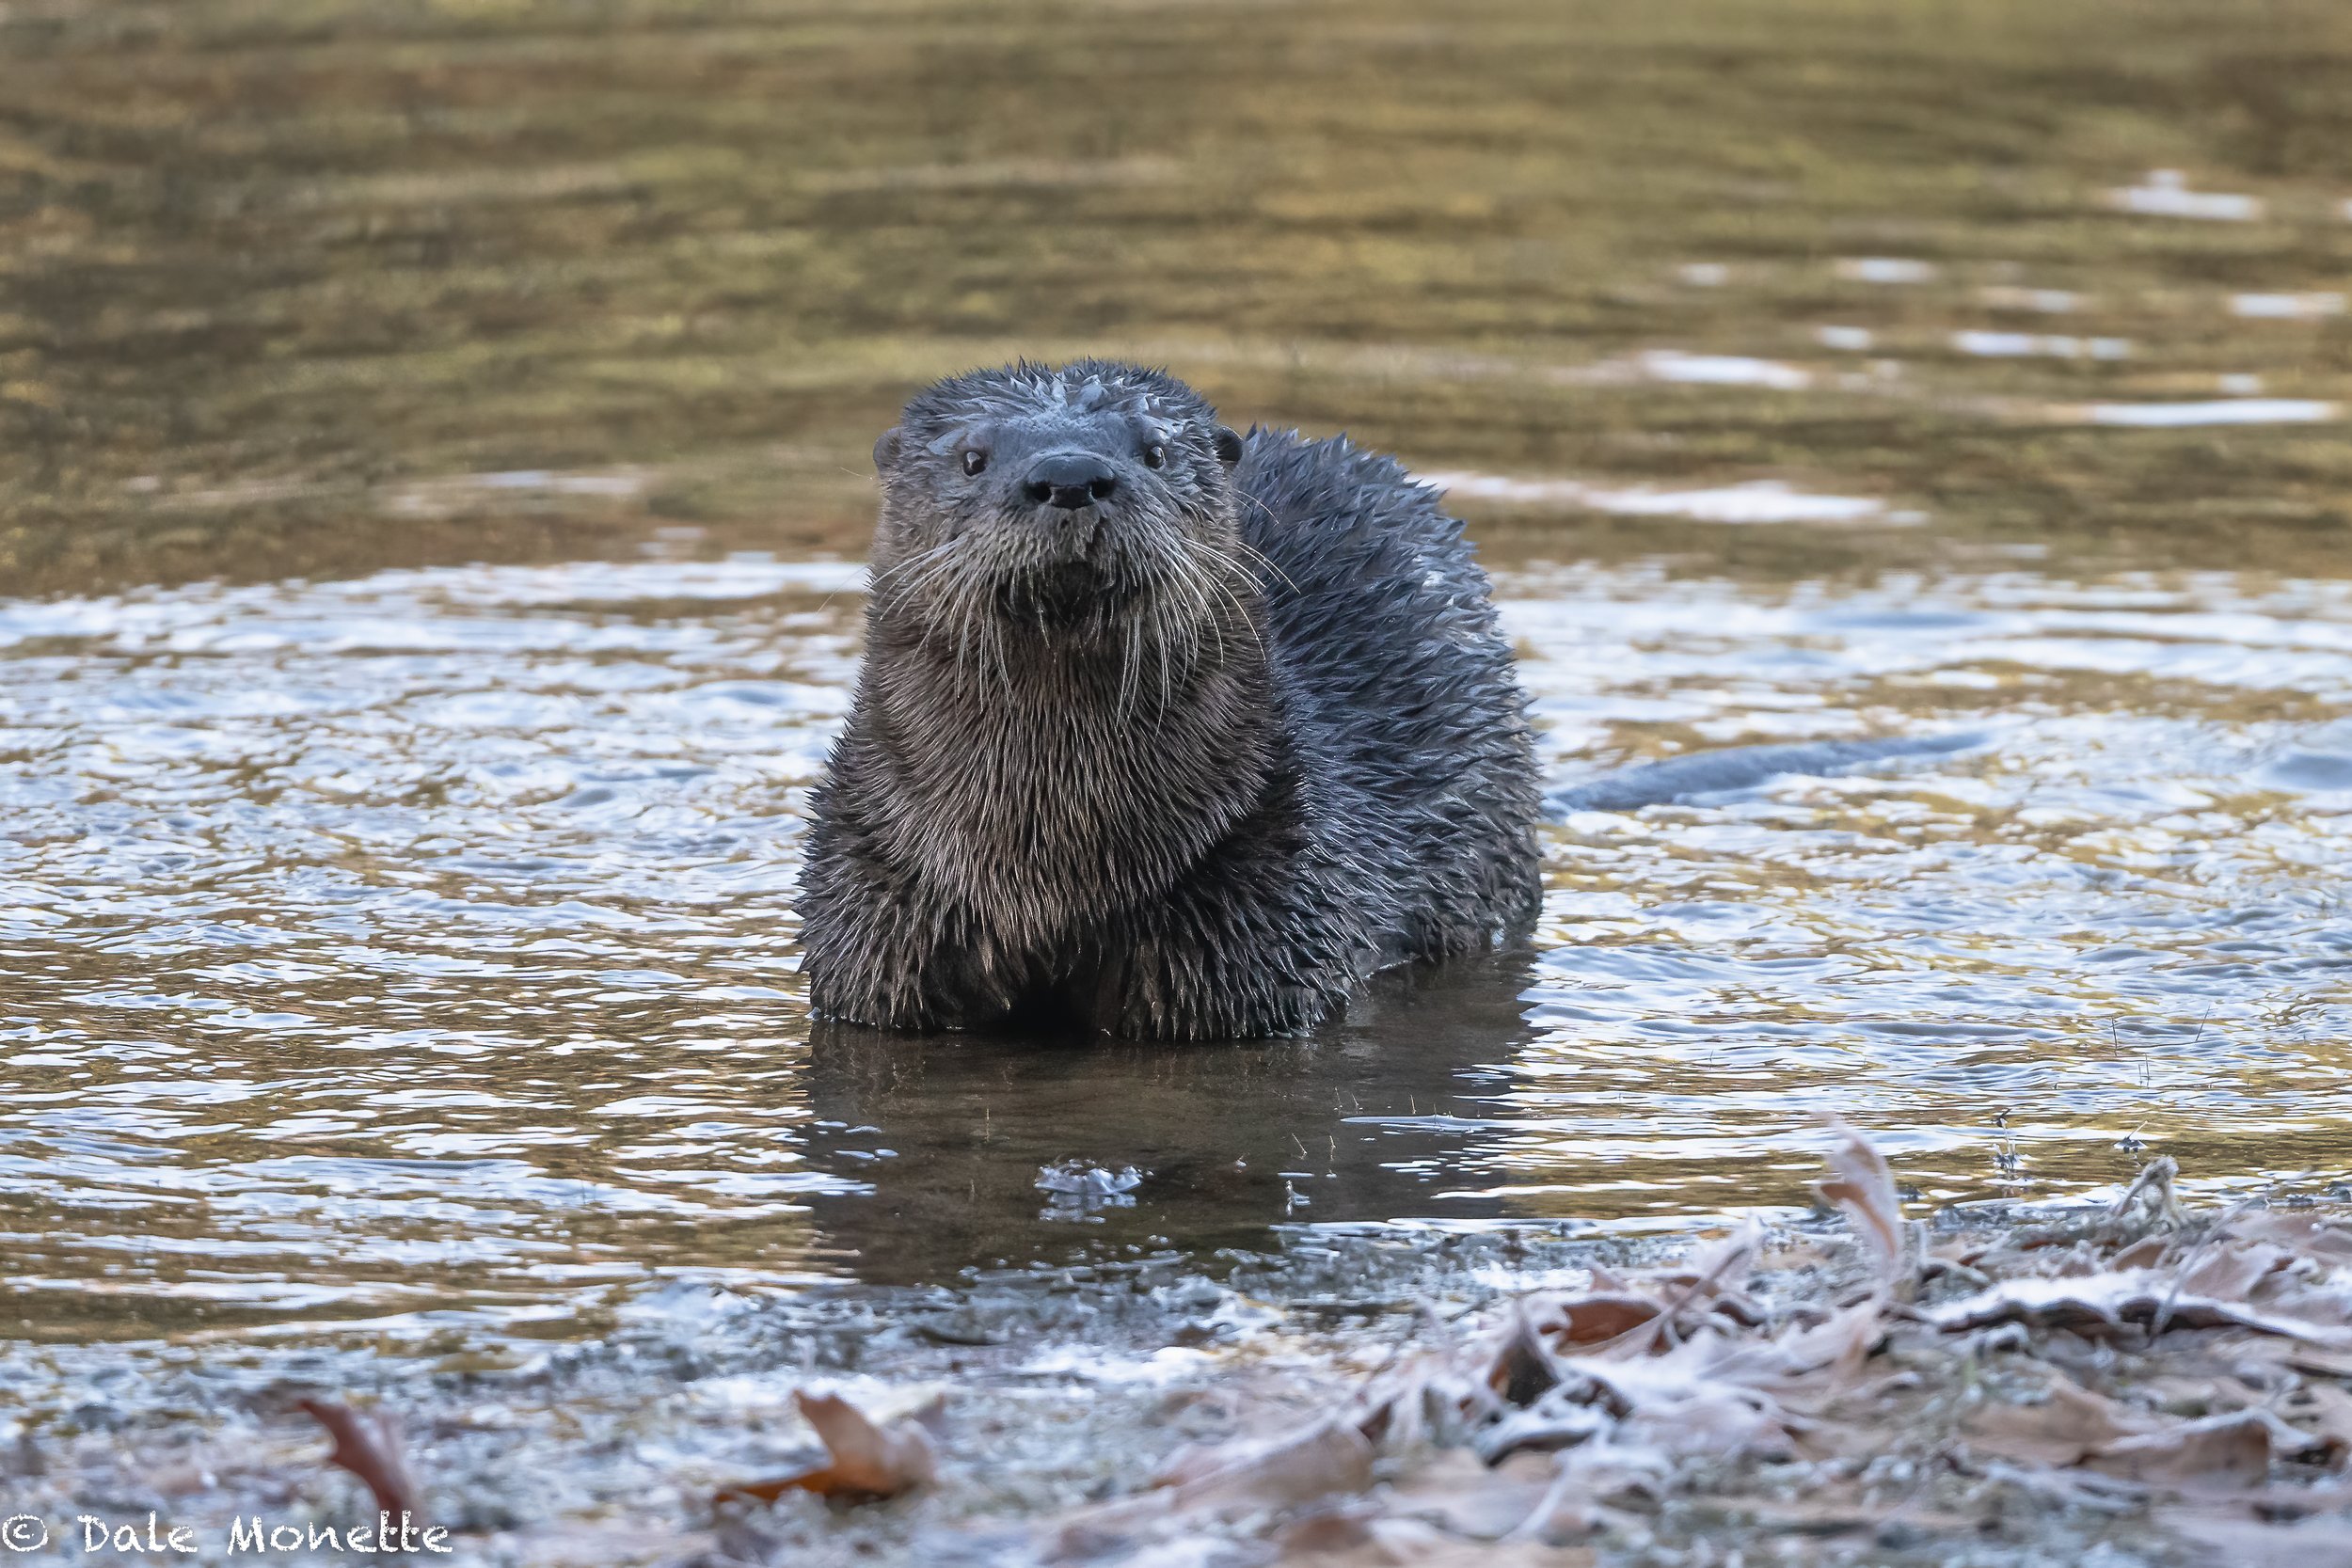   I use a Nikon Z9 camera. It has an electronic shutter which means no clunking mirror thus its silent.  This otter came so close I thought he was coming right up to sniff my boots.   He didn’t hear the camera shooting and I wasn’t moving so he wasn’